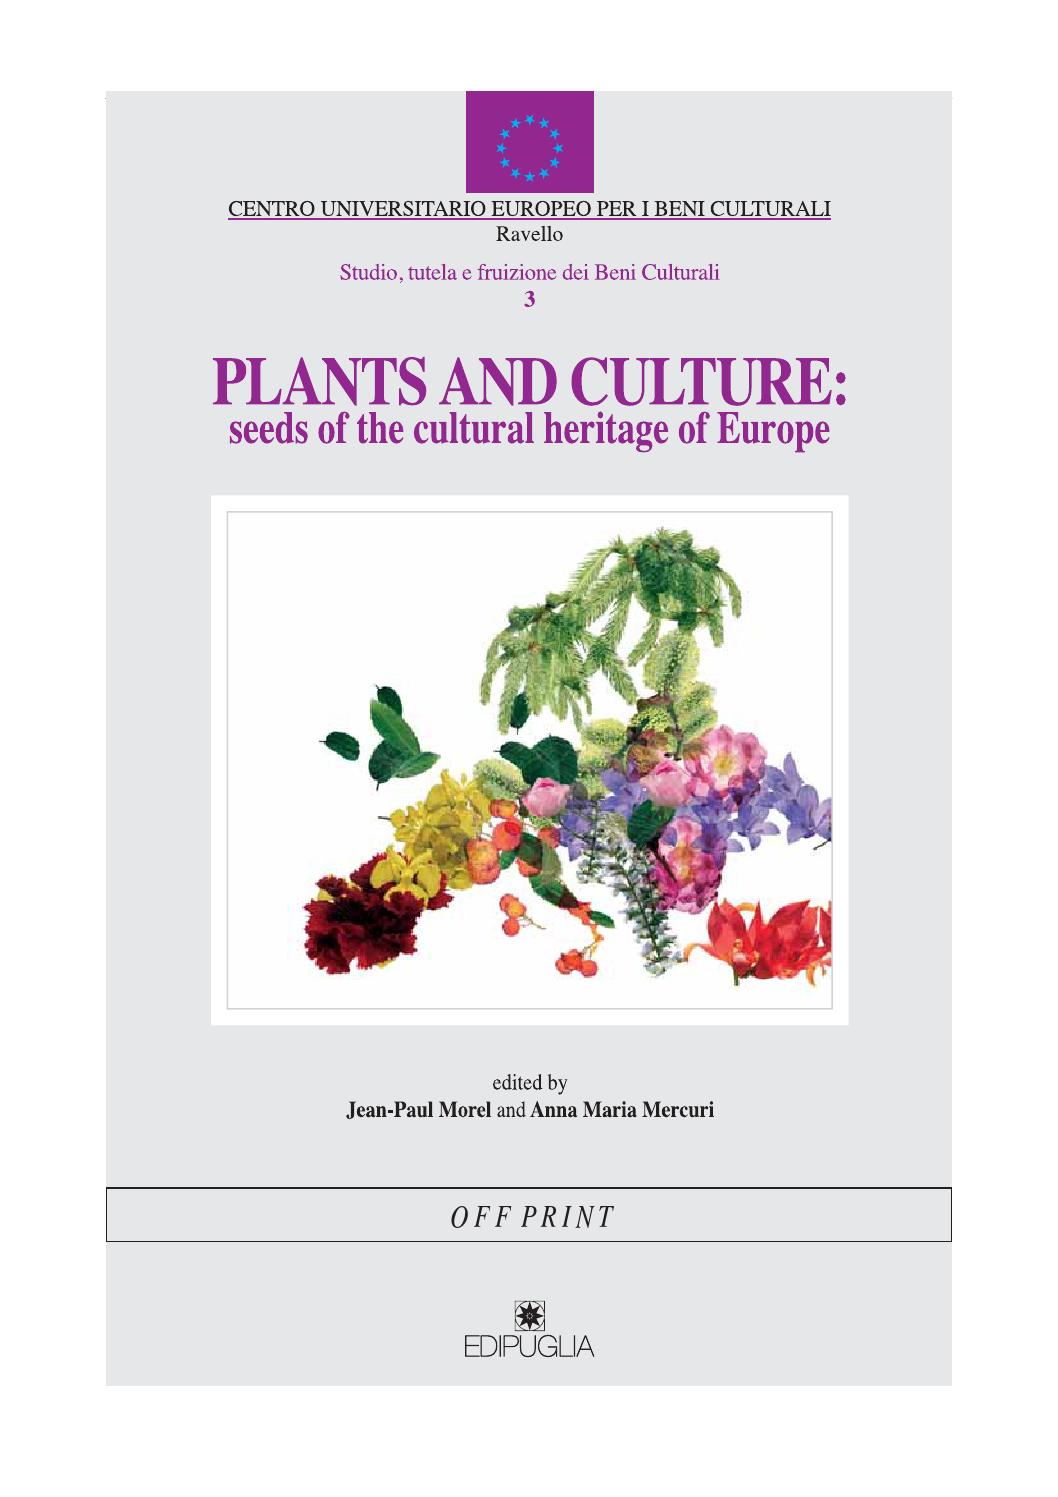 Jardin Des Plantes D Angers Luxe Plants and Culture by Manolis Manolis issuu